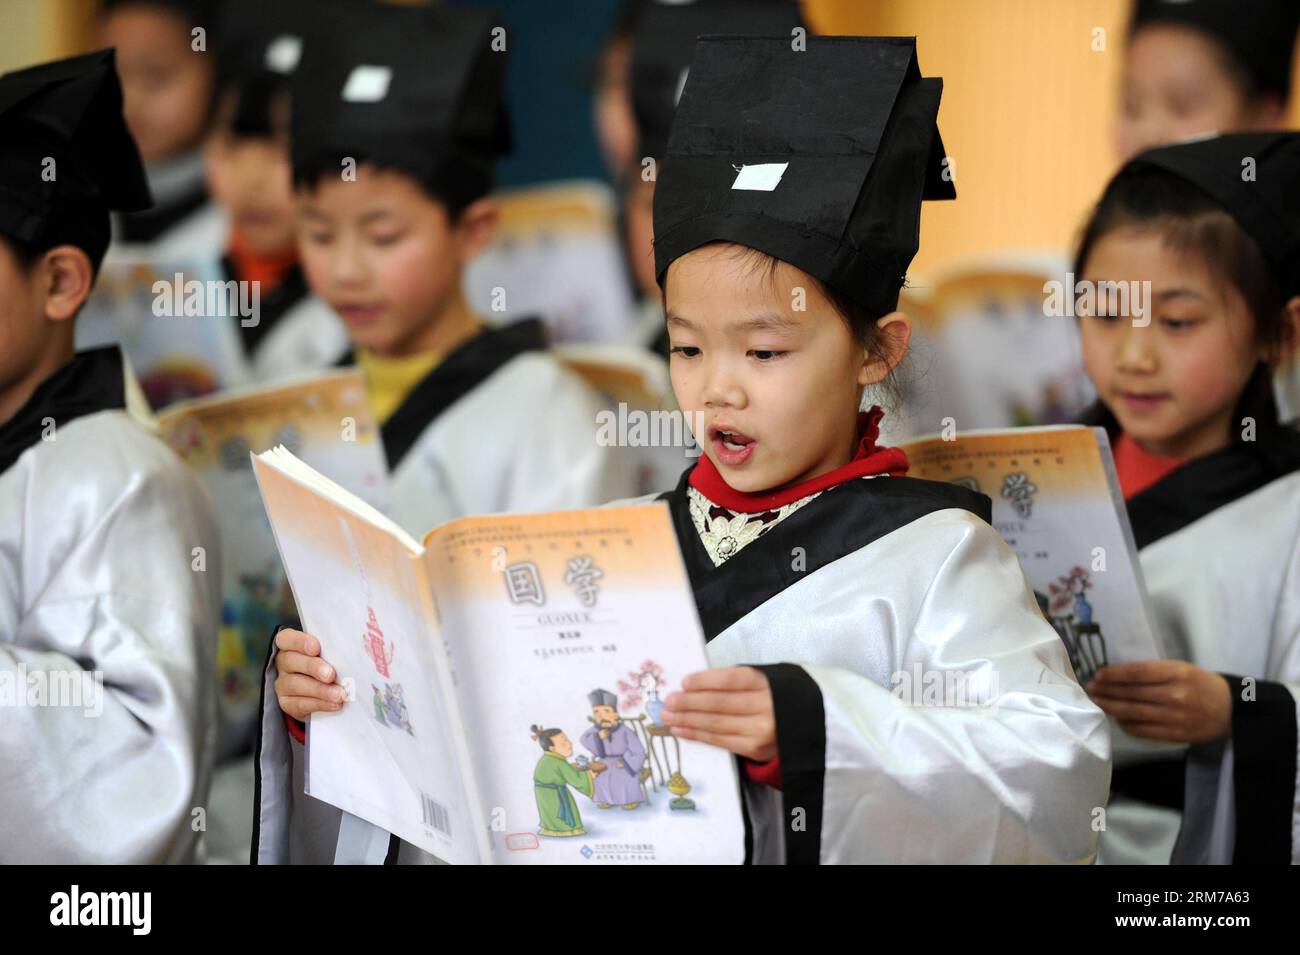 140221 -- HEFEI, Feb. 21, 2014 Xinhua -- Students read Lun Yu , or the Analects of Confucius, at Xiyou Primary School in Hefei, capital of east China s Anhui Province, Feb. 21, 2014. Friday marks the International Mother Language Day, which has been observed every year on February 21 since 2000 to promote linguistic and cultural diversity and multilingualism. Xinhua/Liu Junxiwjq CHINA-HEFEI-INT L MOTHER LANGUAGE DAY CN PUBLICATIONxNOTxINxCHN Stock Photo